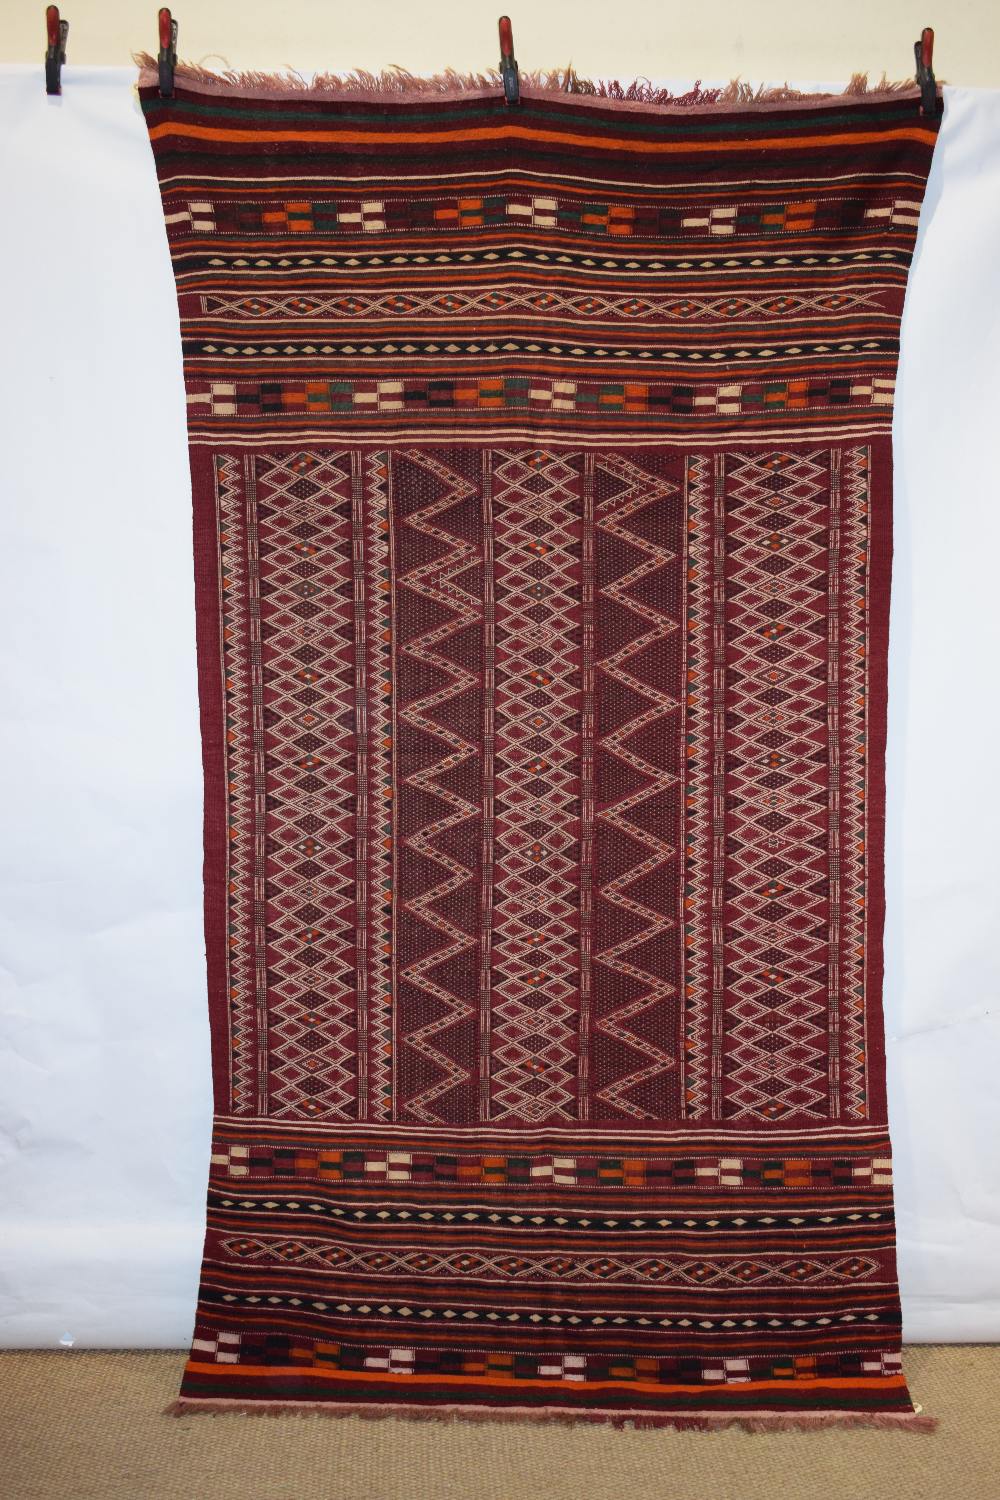 Middle Atlas flat-woven cover, Morocco, about 1940s, 9ft. X 4ft. 8in. 2.75m. X 1.42m. Woven in